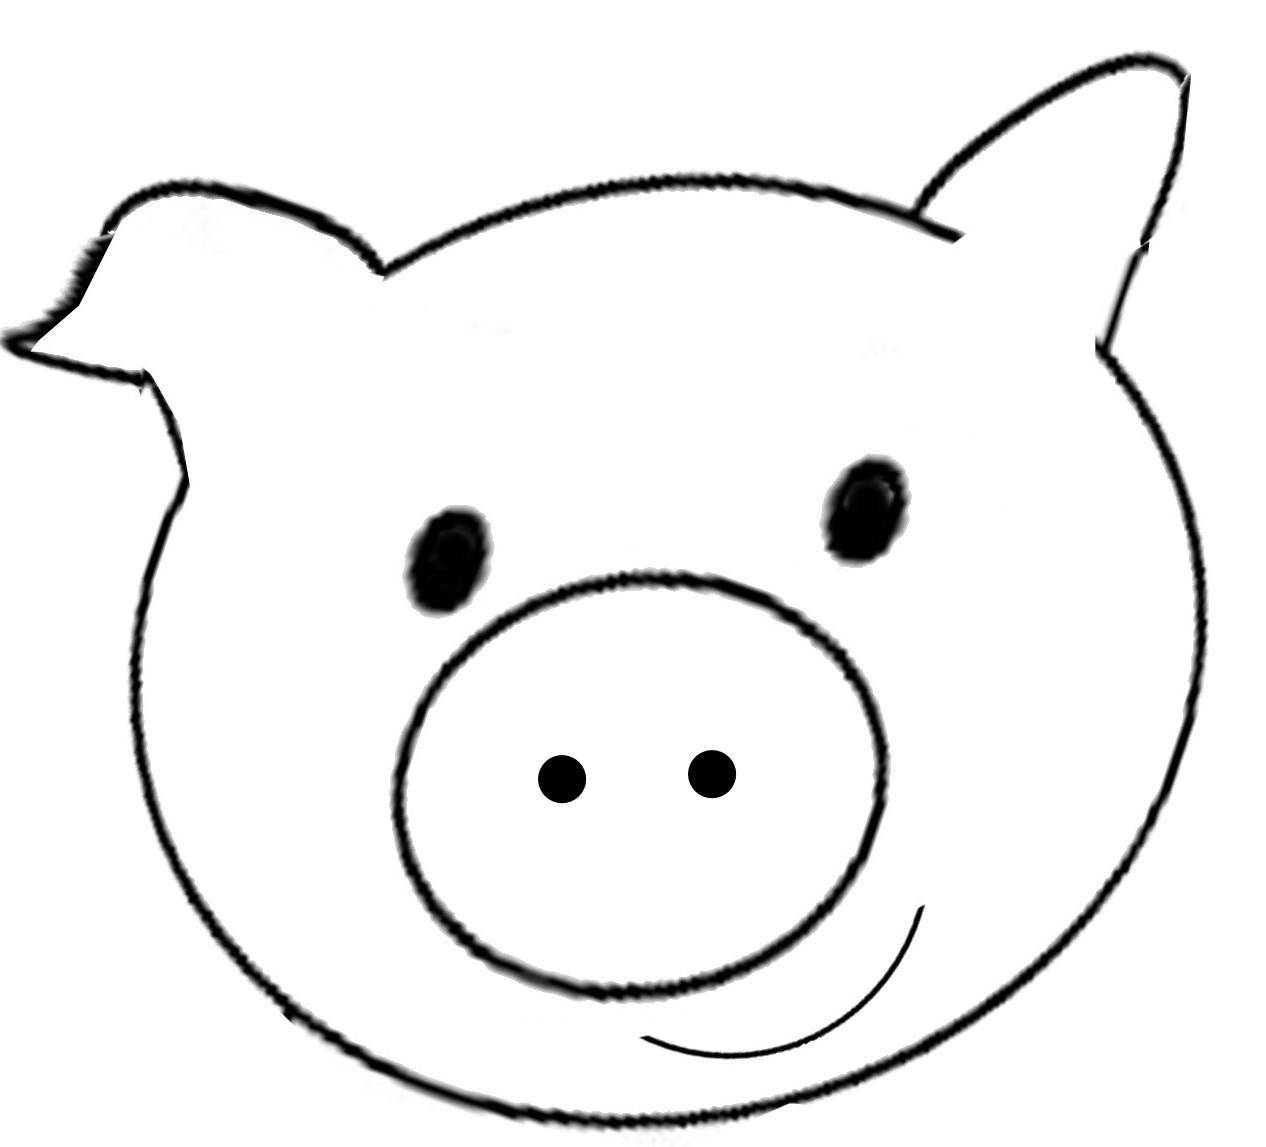 Coloring Pig. Category The outline of a pig to cut. Tags:  .